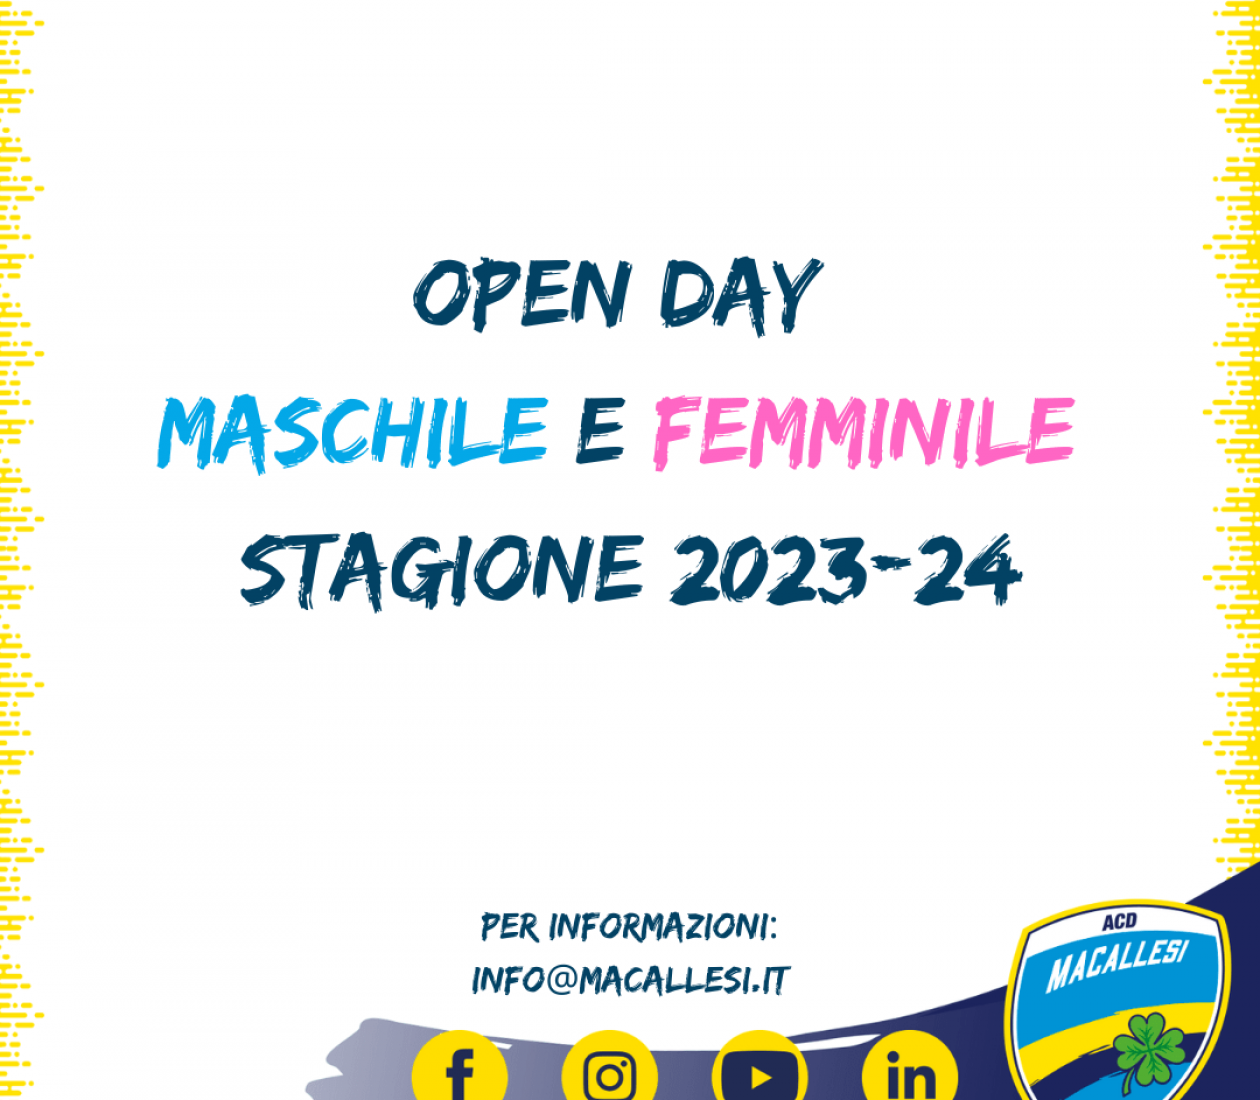 Open day stagione 2023-24